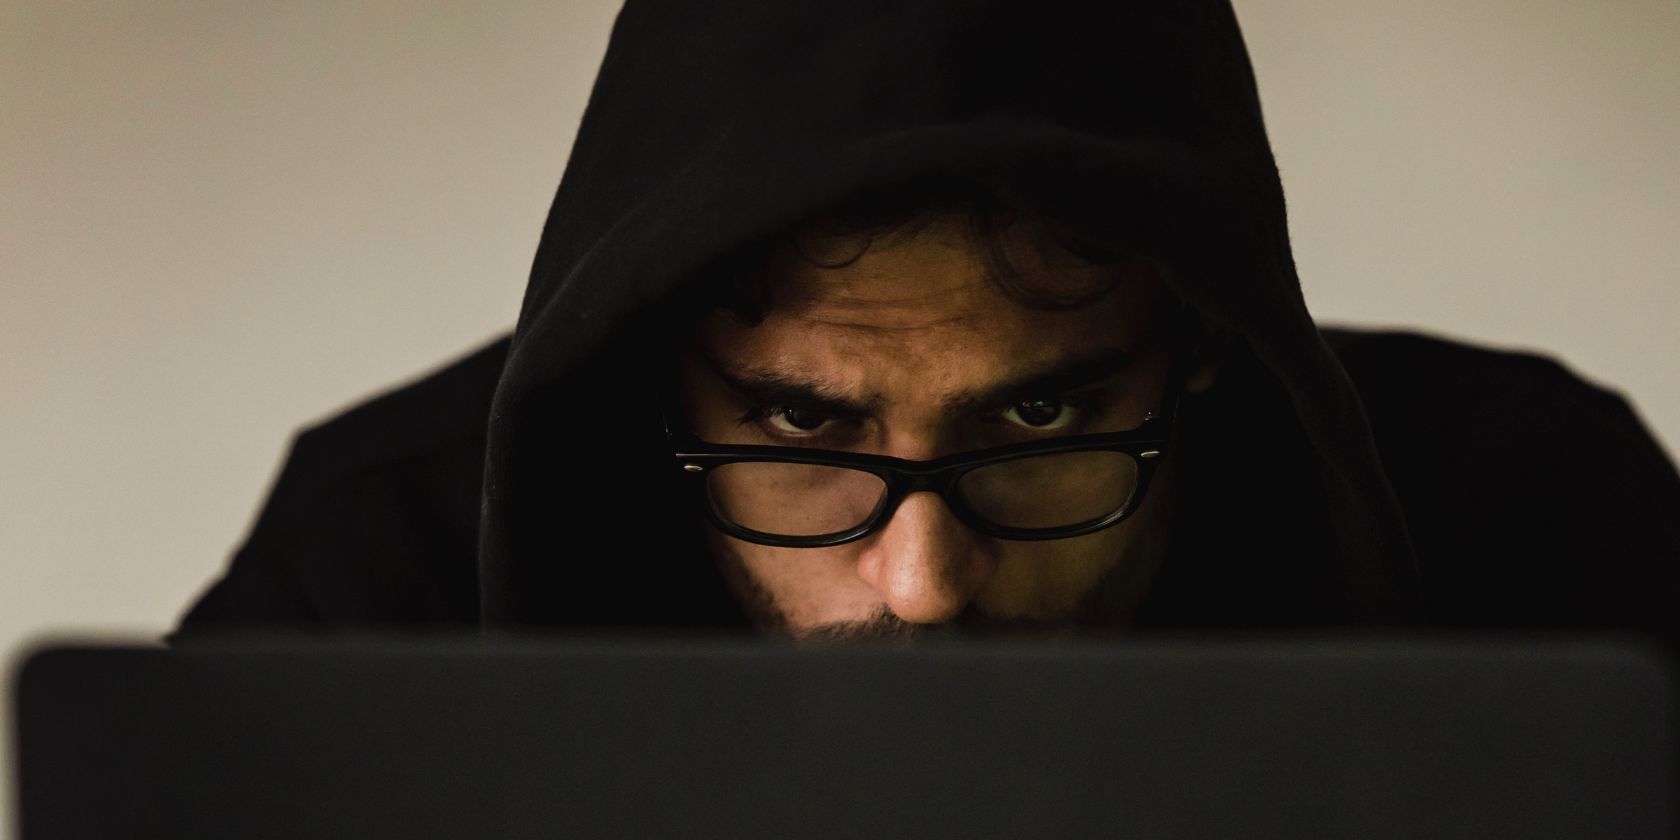 hooded person using laptop